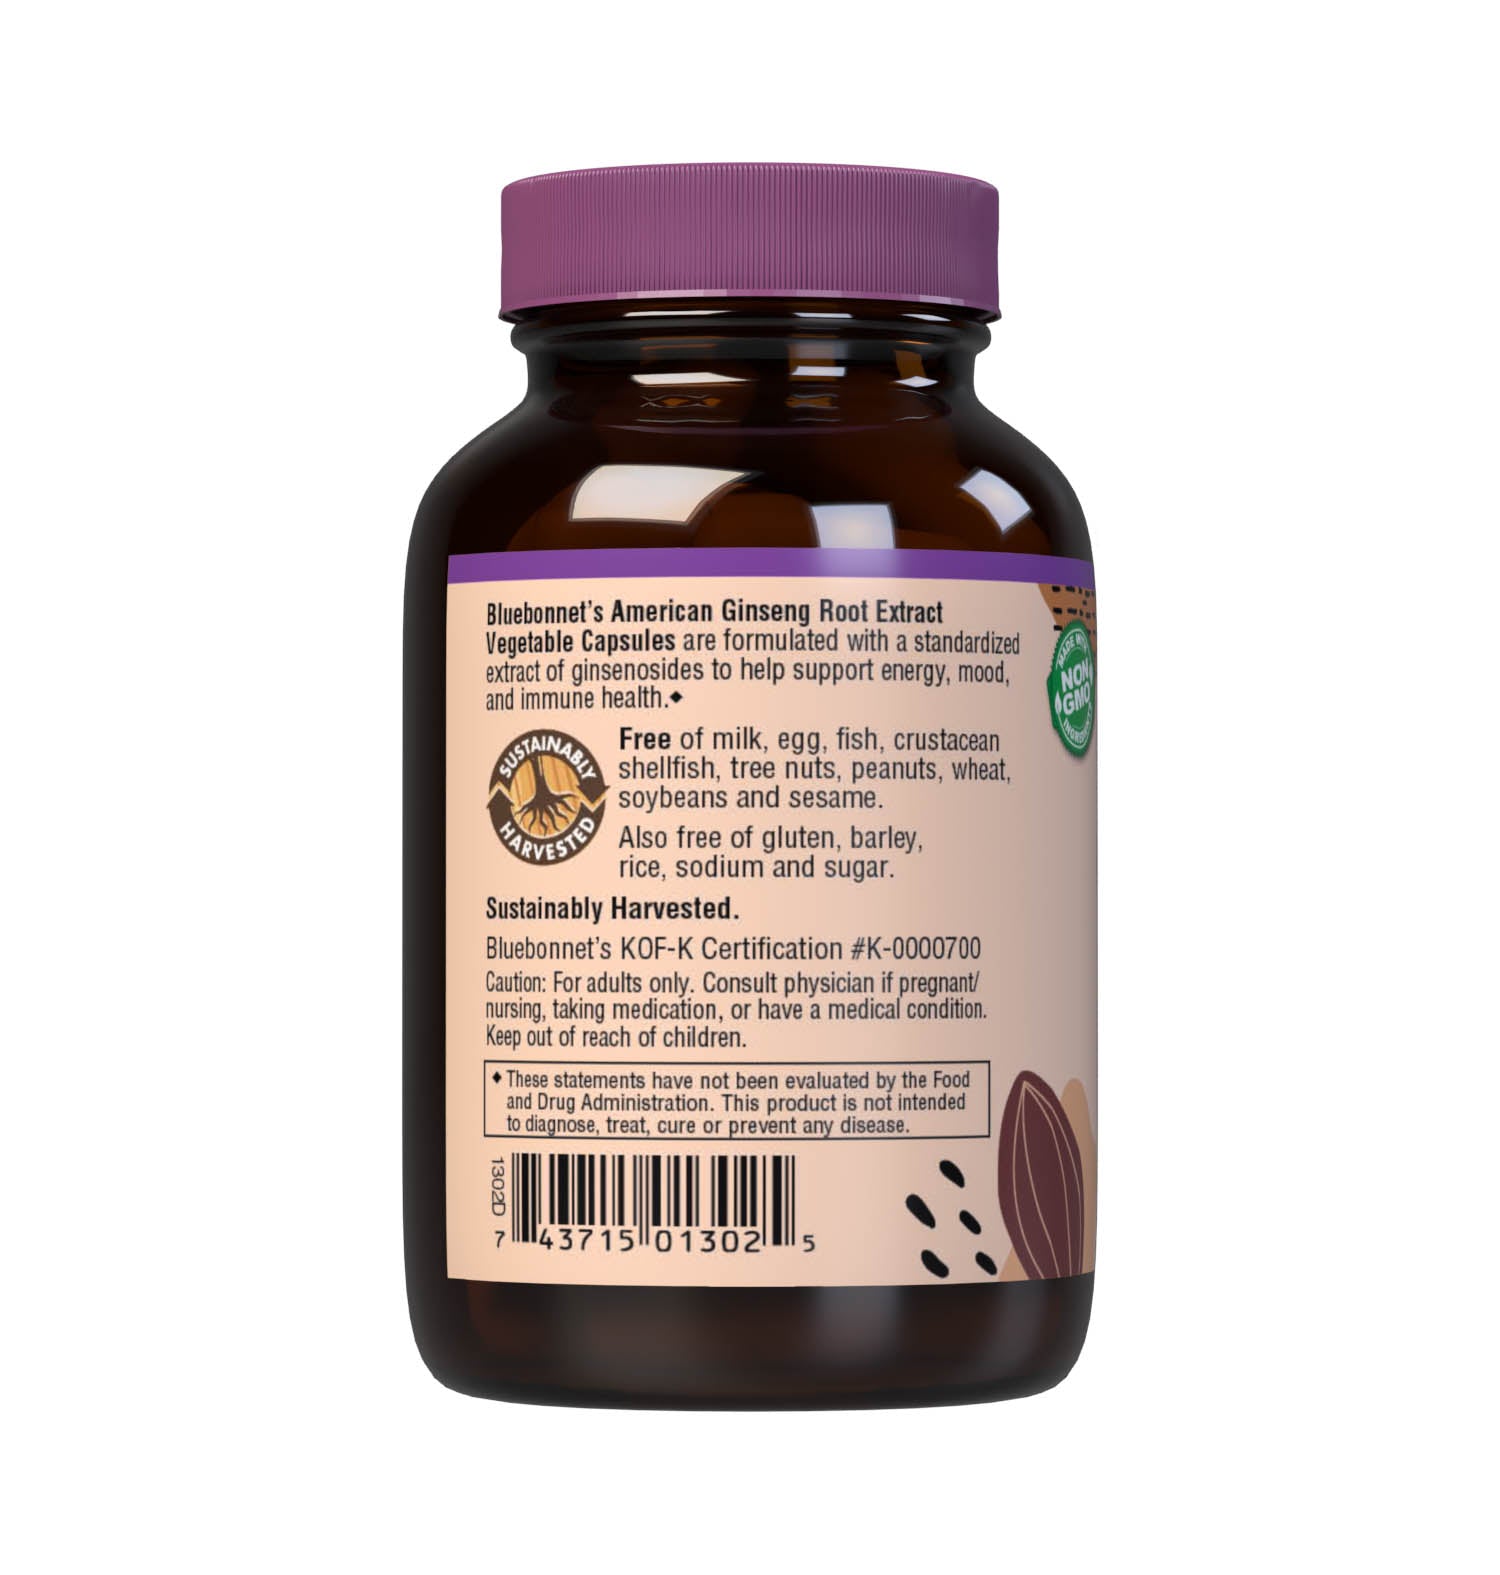 Bluebonnet’s Standardized American Ginseng Root Extract 60 Vegetable Capsules provide a standardized extract of ginsenosides, the most researched active constituents found in American ginseng root. A clean and gentle water-based extraction method is employed to capture and preserve American ginseng’s most valuable components. Description panel. #size_60 count